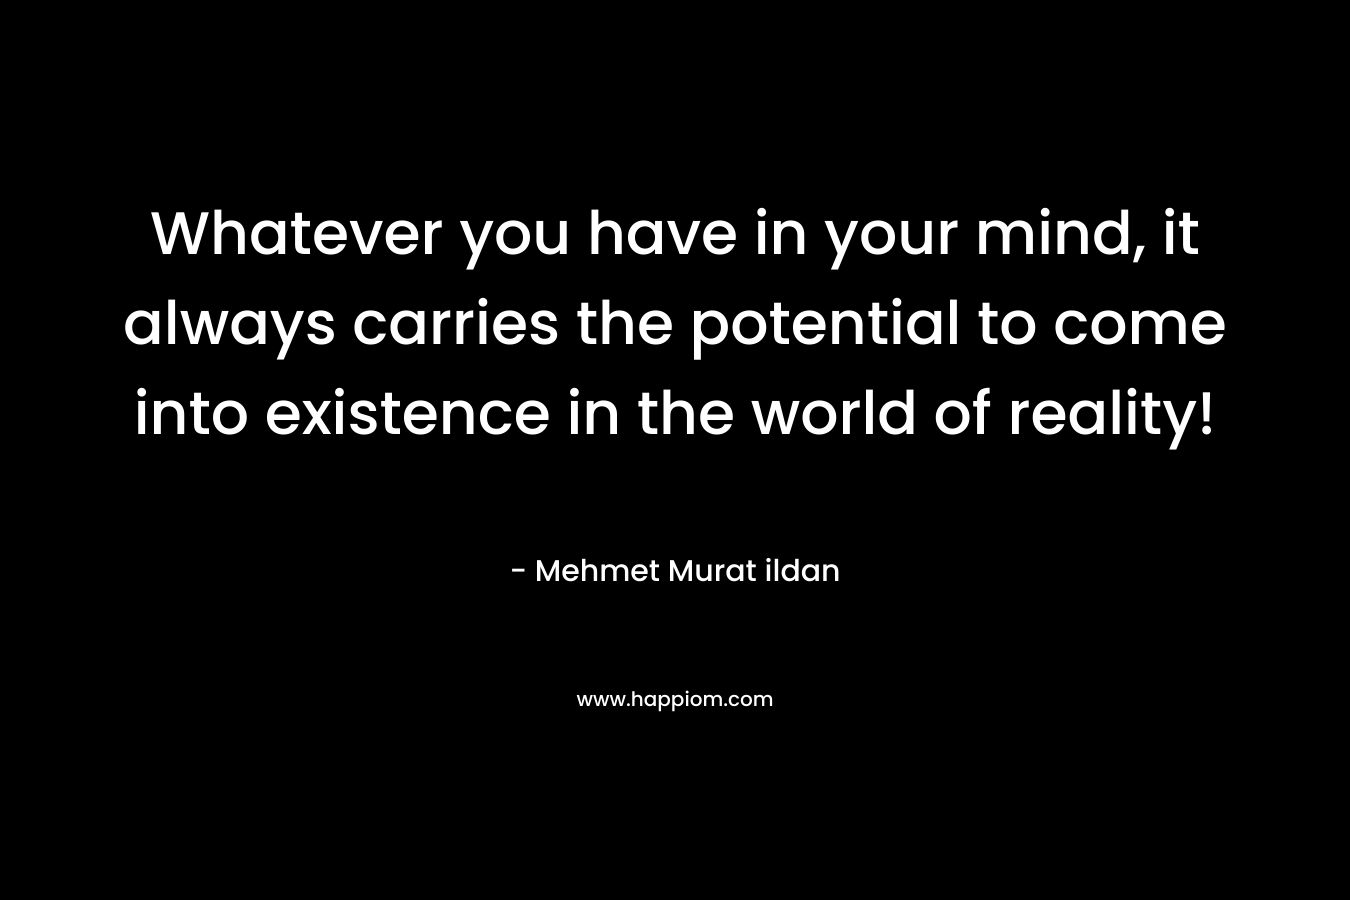 Whatever you have in your mind, it always carries the potential to come into existence in the world of reality!